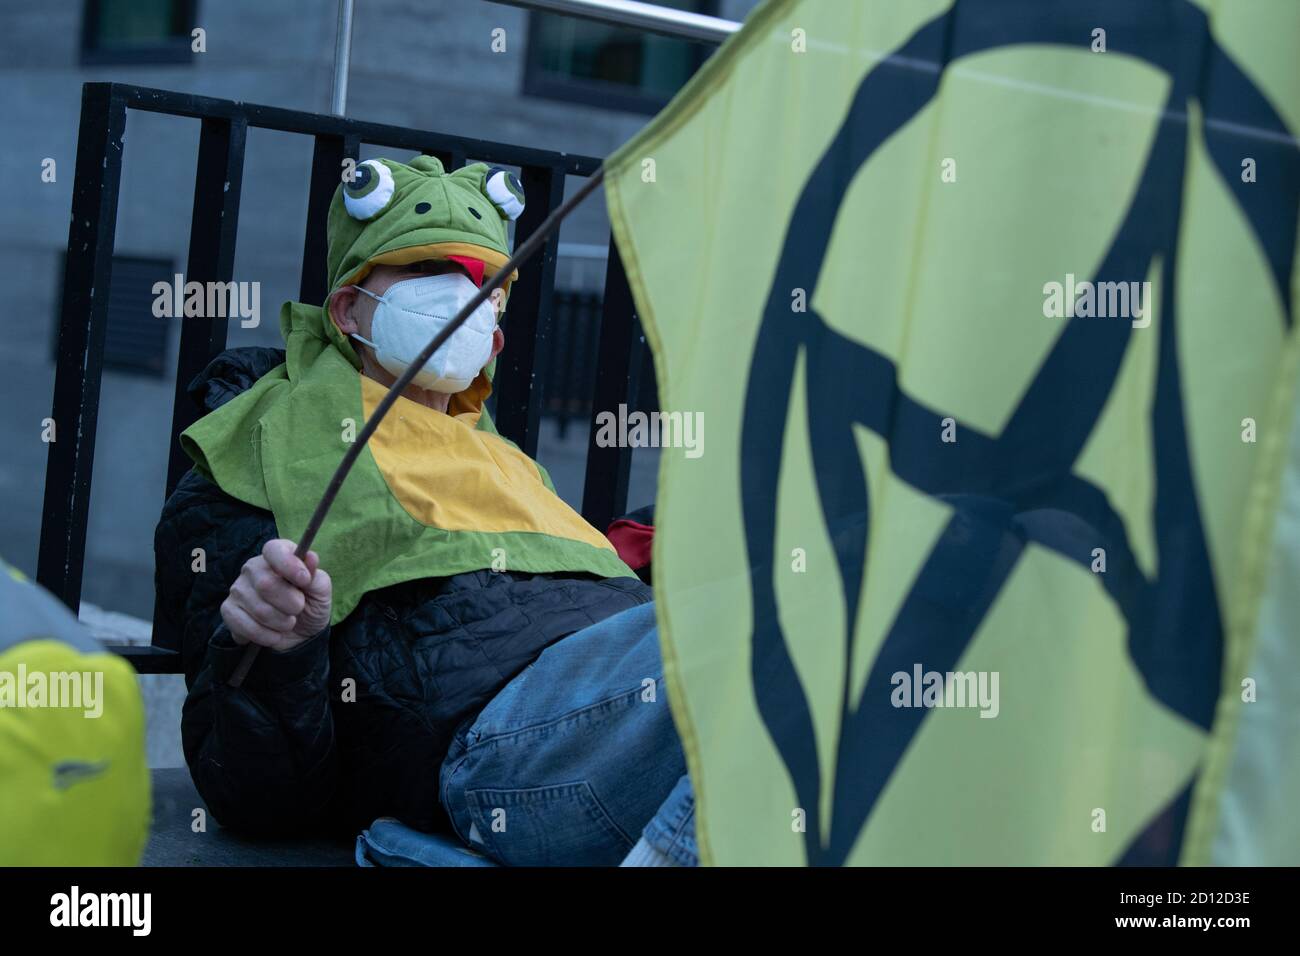 05 October 2020, Berlin: An environmental activist from Extinction Rebellion (XR) sits with a flag with the XR logo at an entrance to the Federal Ministry of Transport during a protest against the destruction of the environment by vehicles and the construction of new roads. This week, Extinction Rebellion has announced protest actions against environmental destruction and climate change. Photo: Paul Zinken/dpa Stock Photo